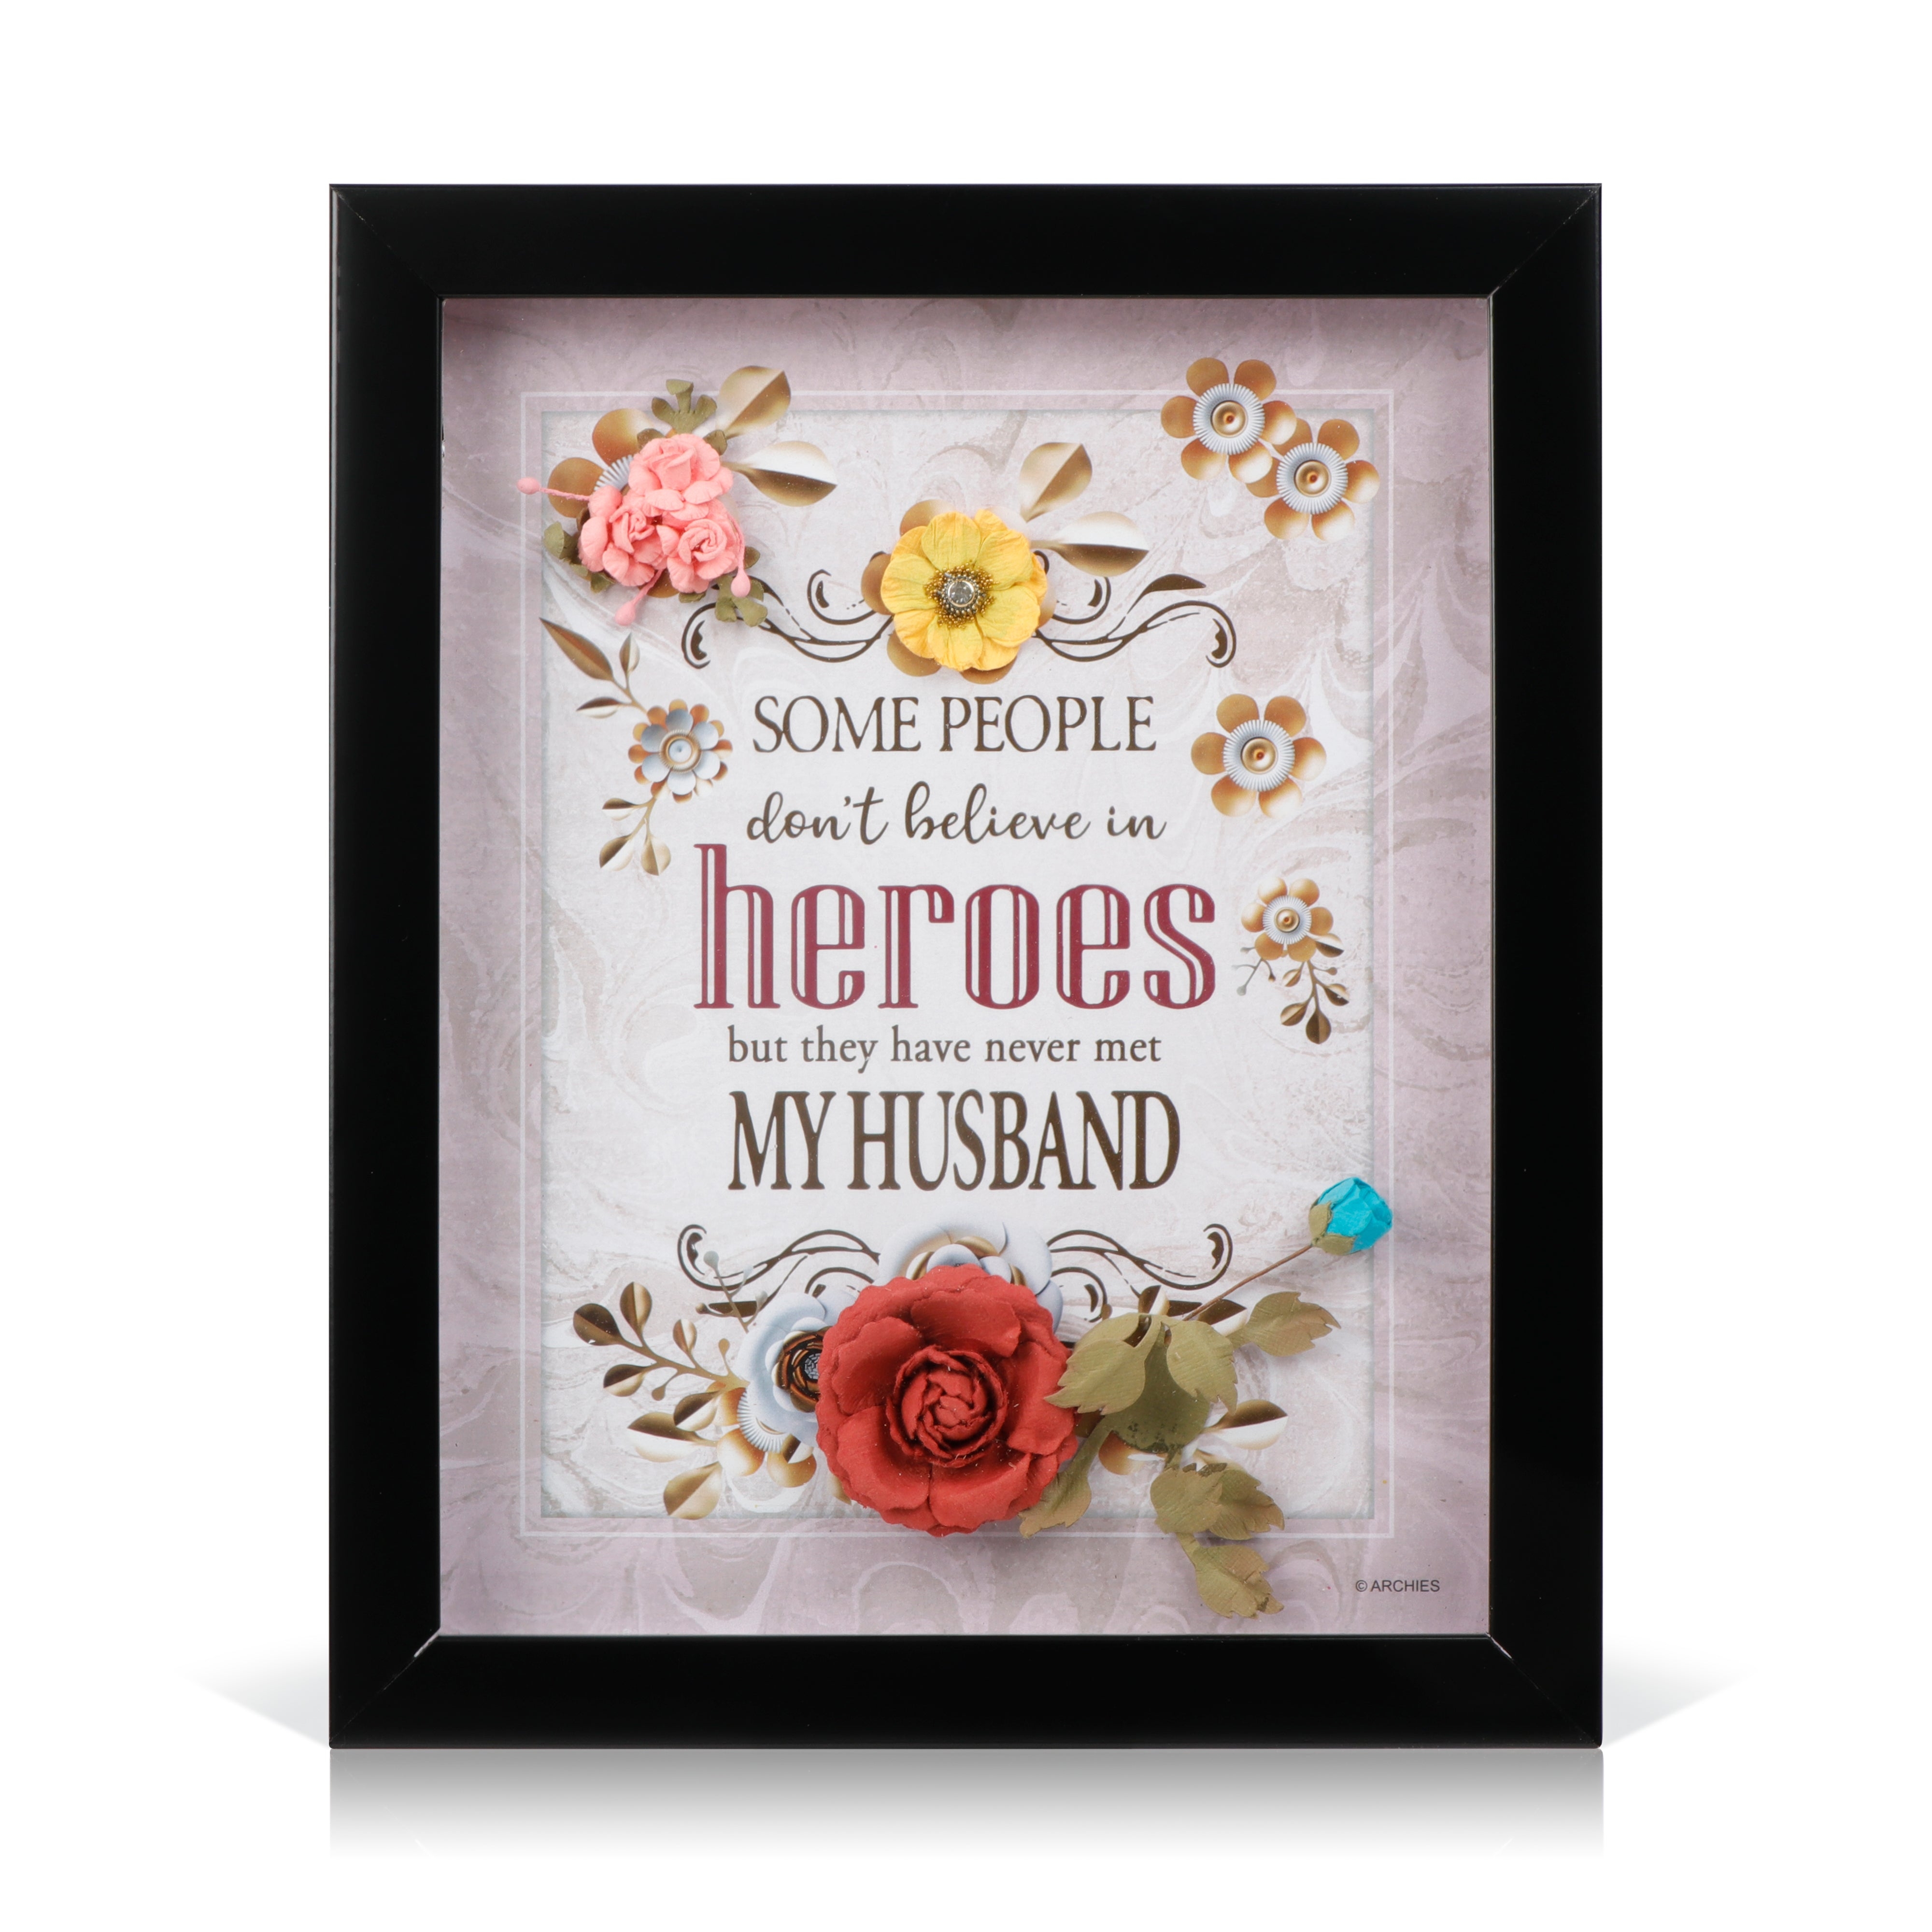 Archies | Archies KEEPSAKE QUOTATION - SOMEONE DONT......MY HUSBAND For gifting and Home décor